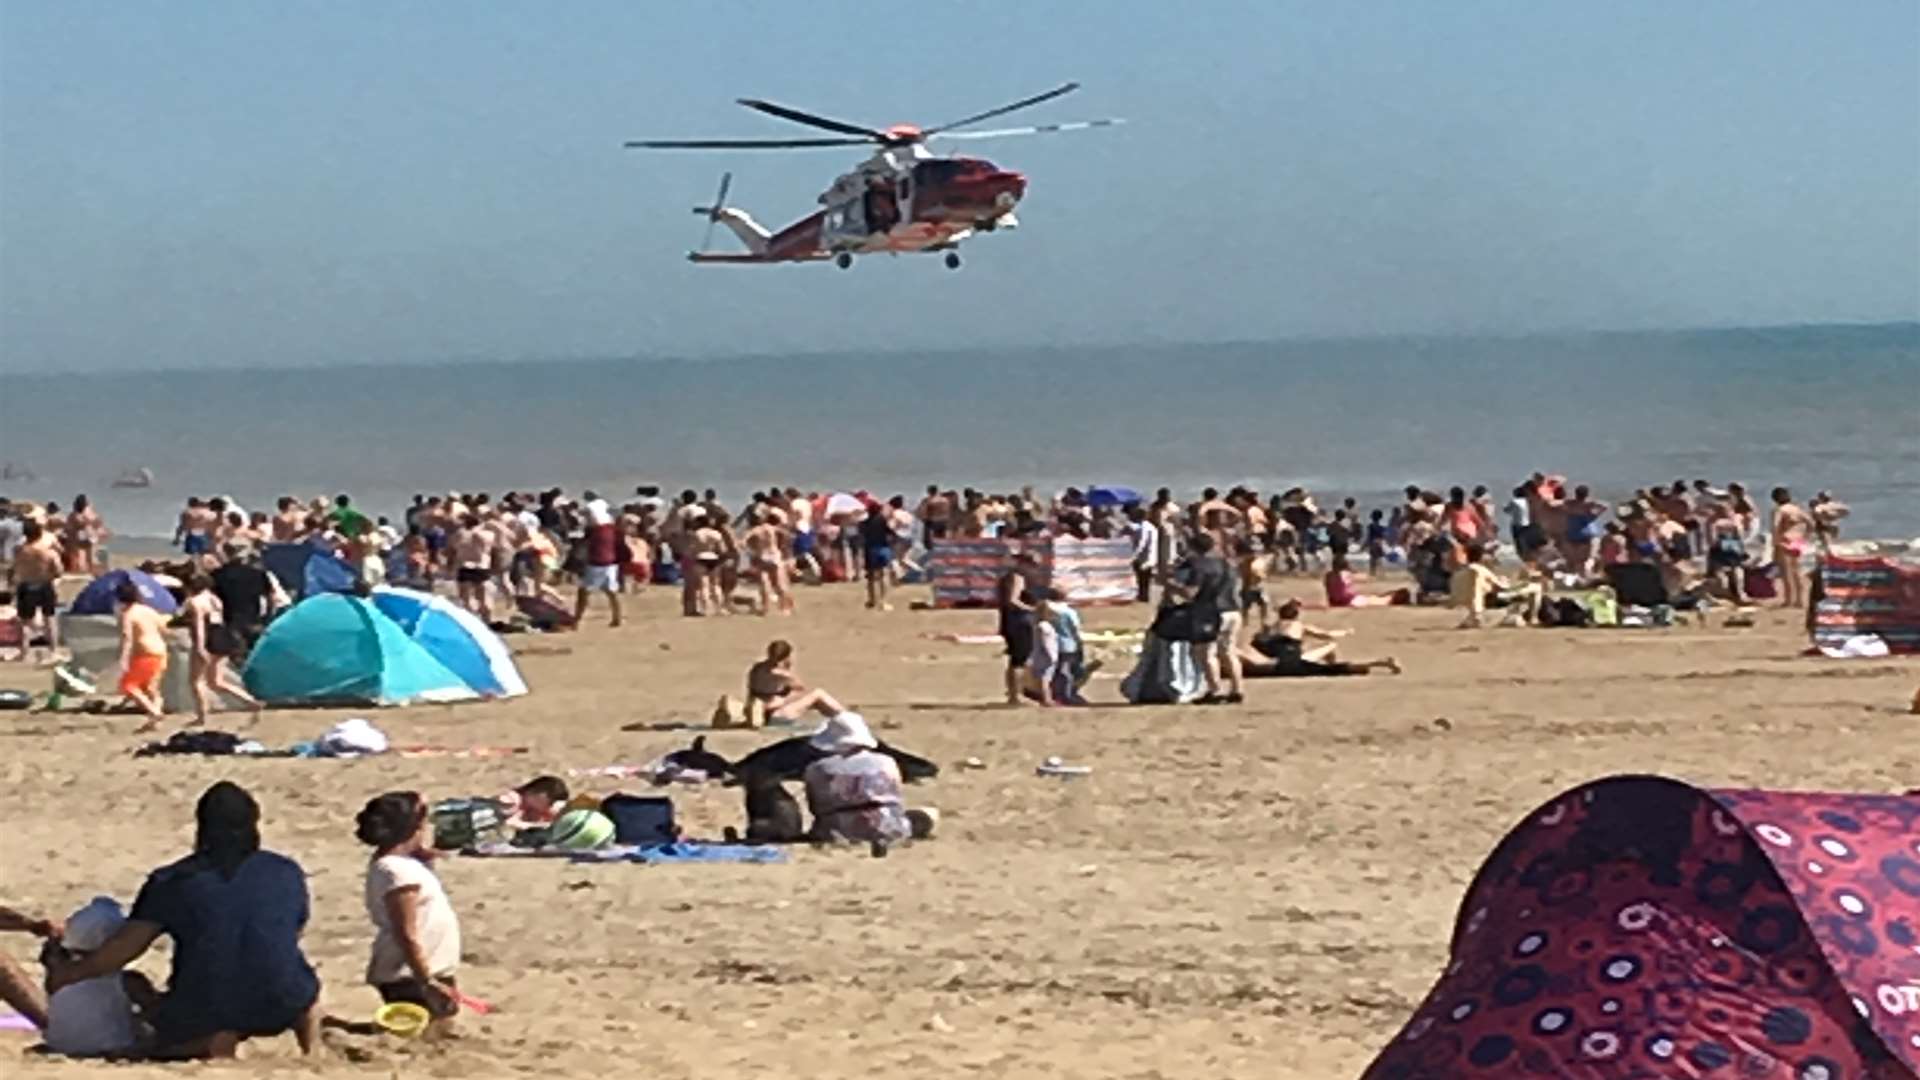 Air ambulance and coastguard's search and rescue helicopter were called